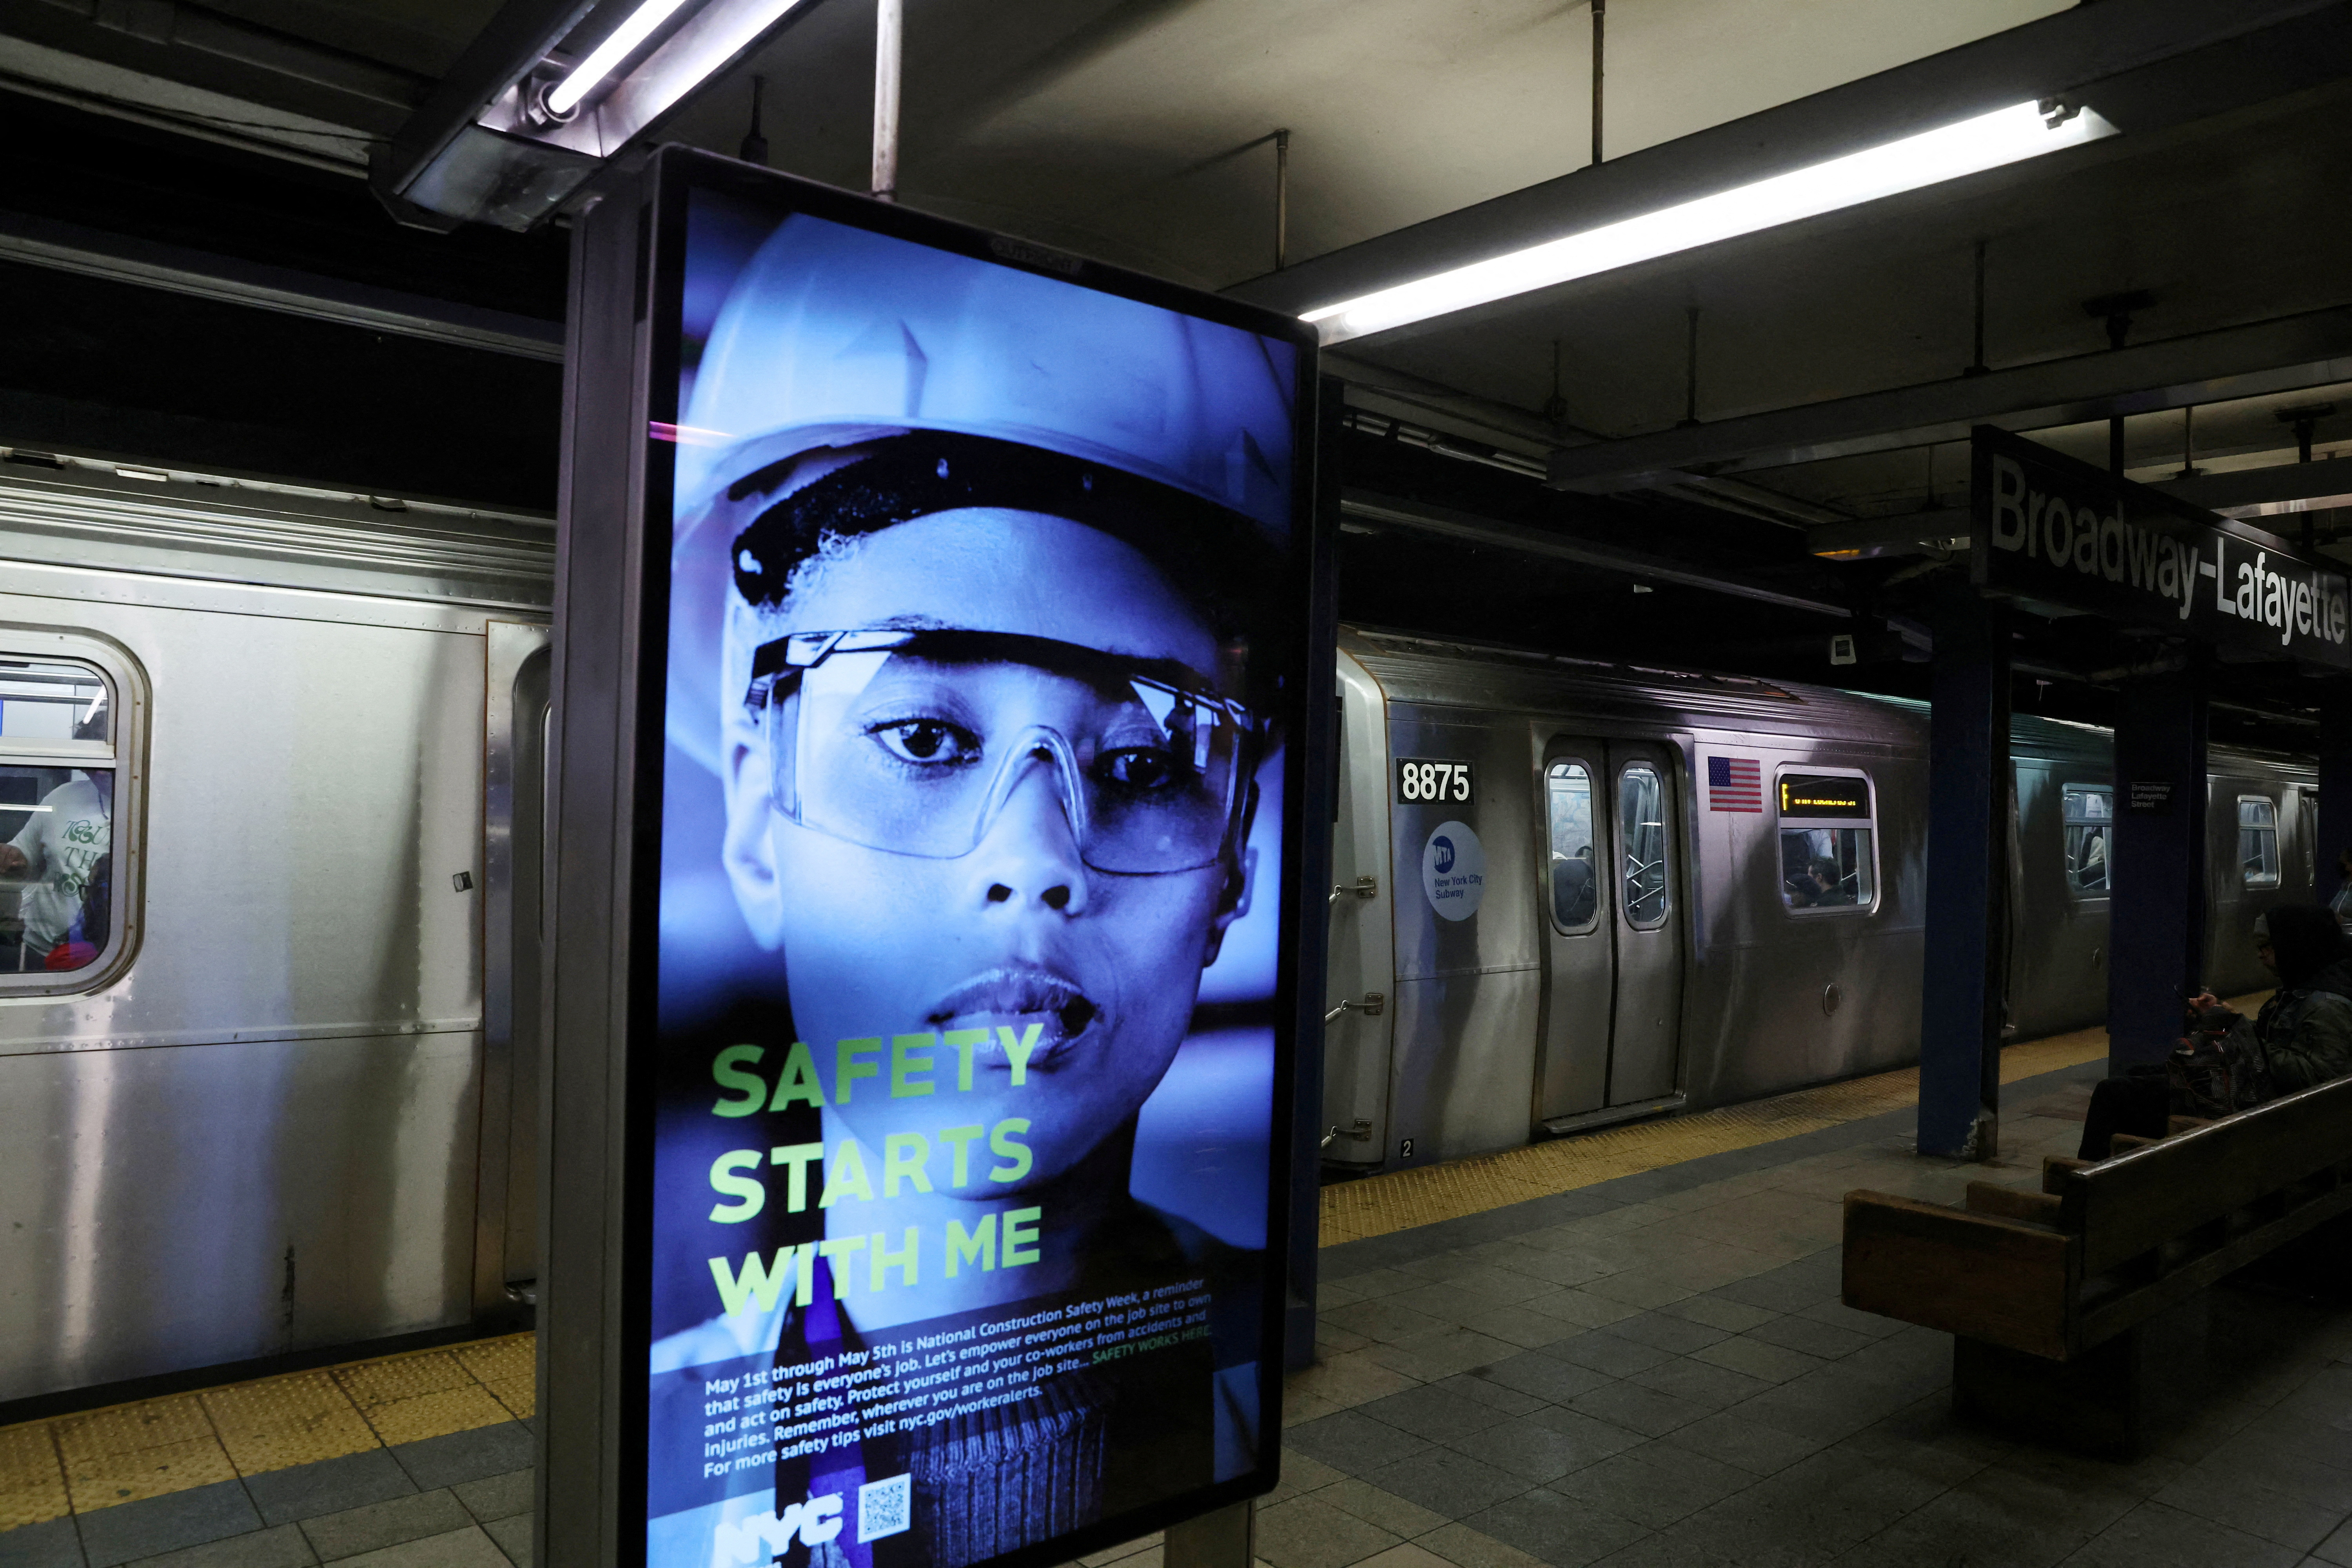 A digital public safety notice illuminates near where Jordan Neely was placed in a chokehold by a fellow passenger on a New York City subway train